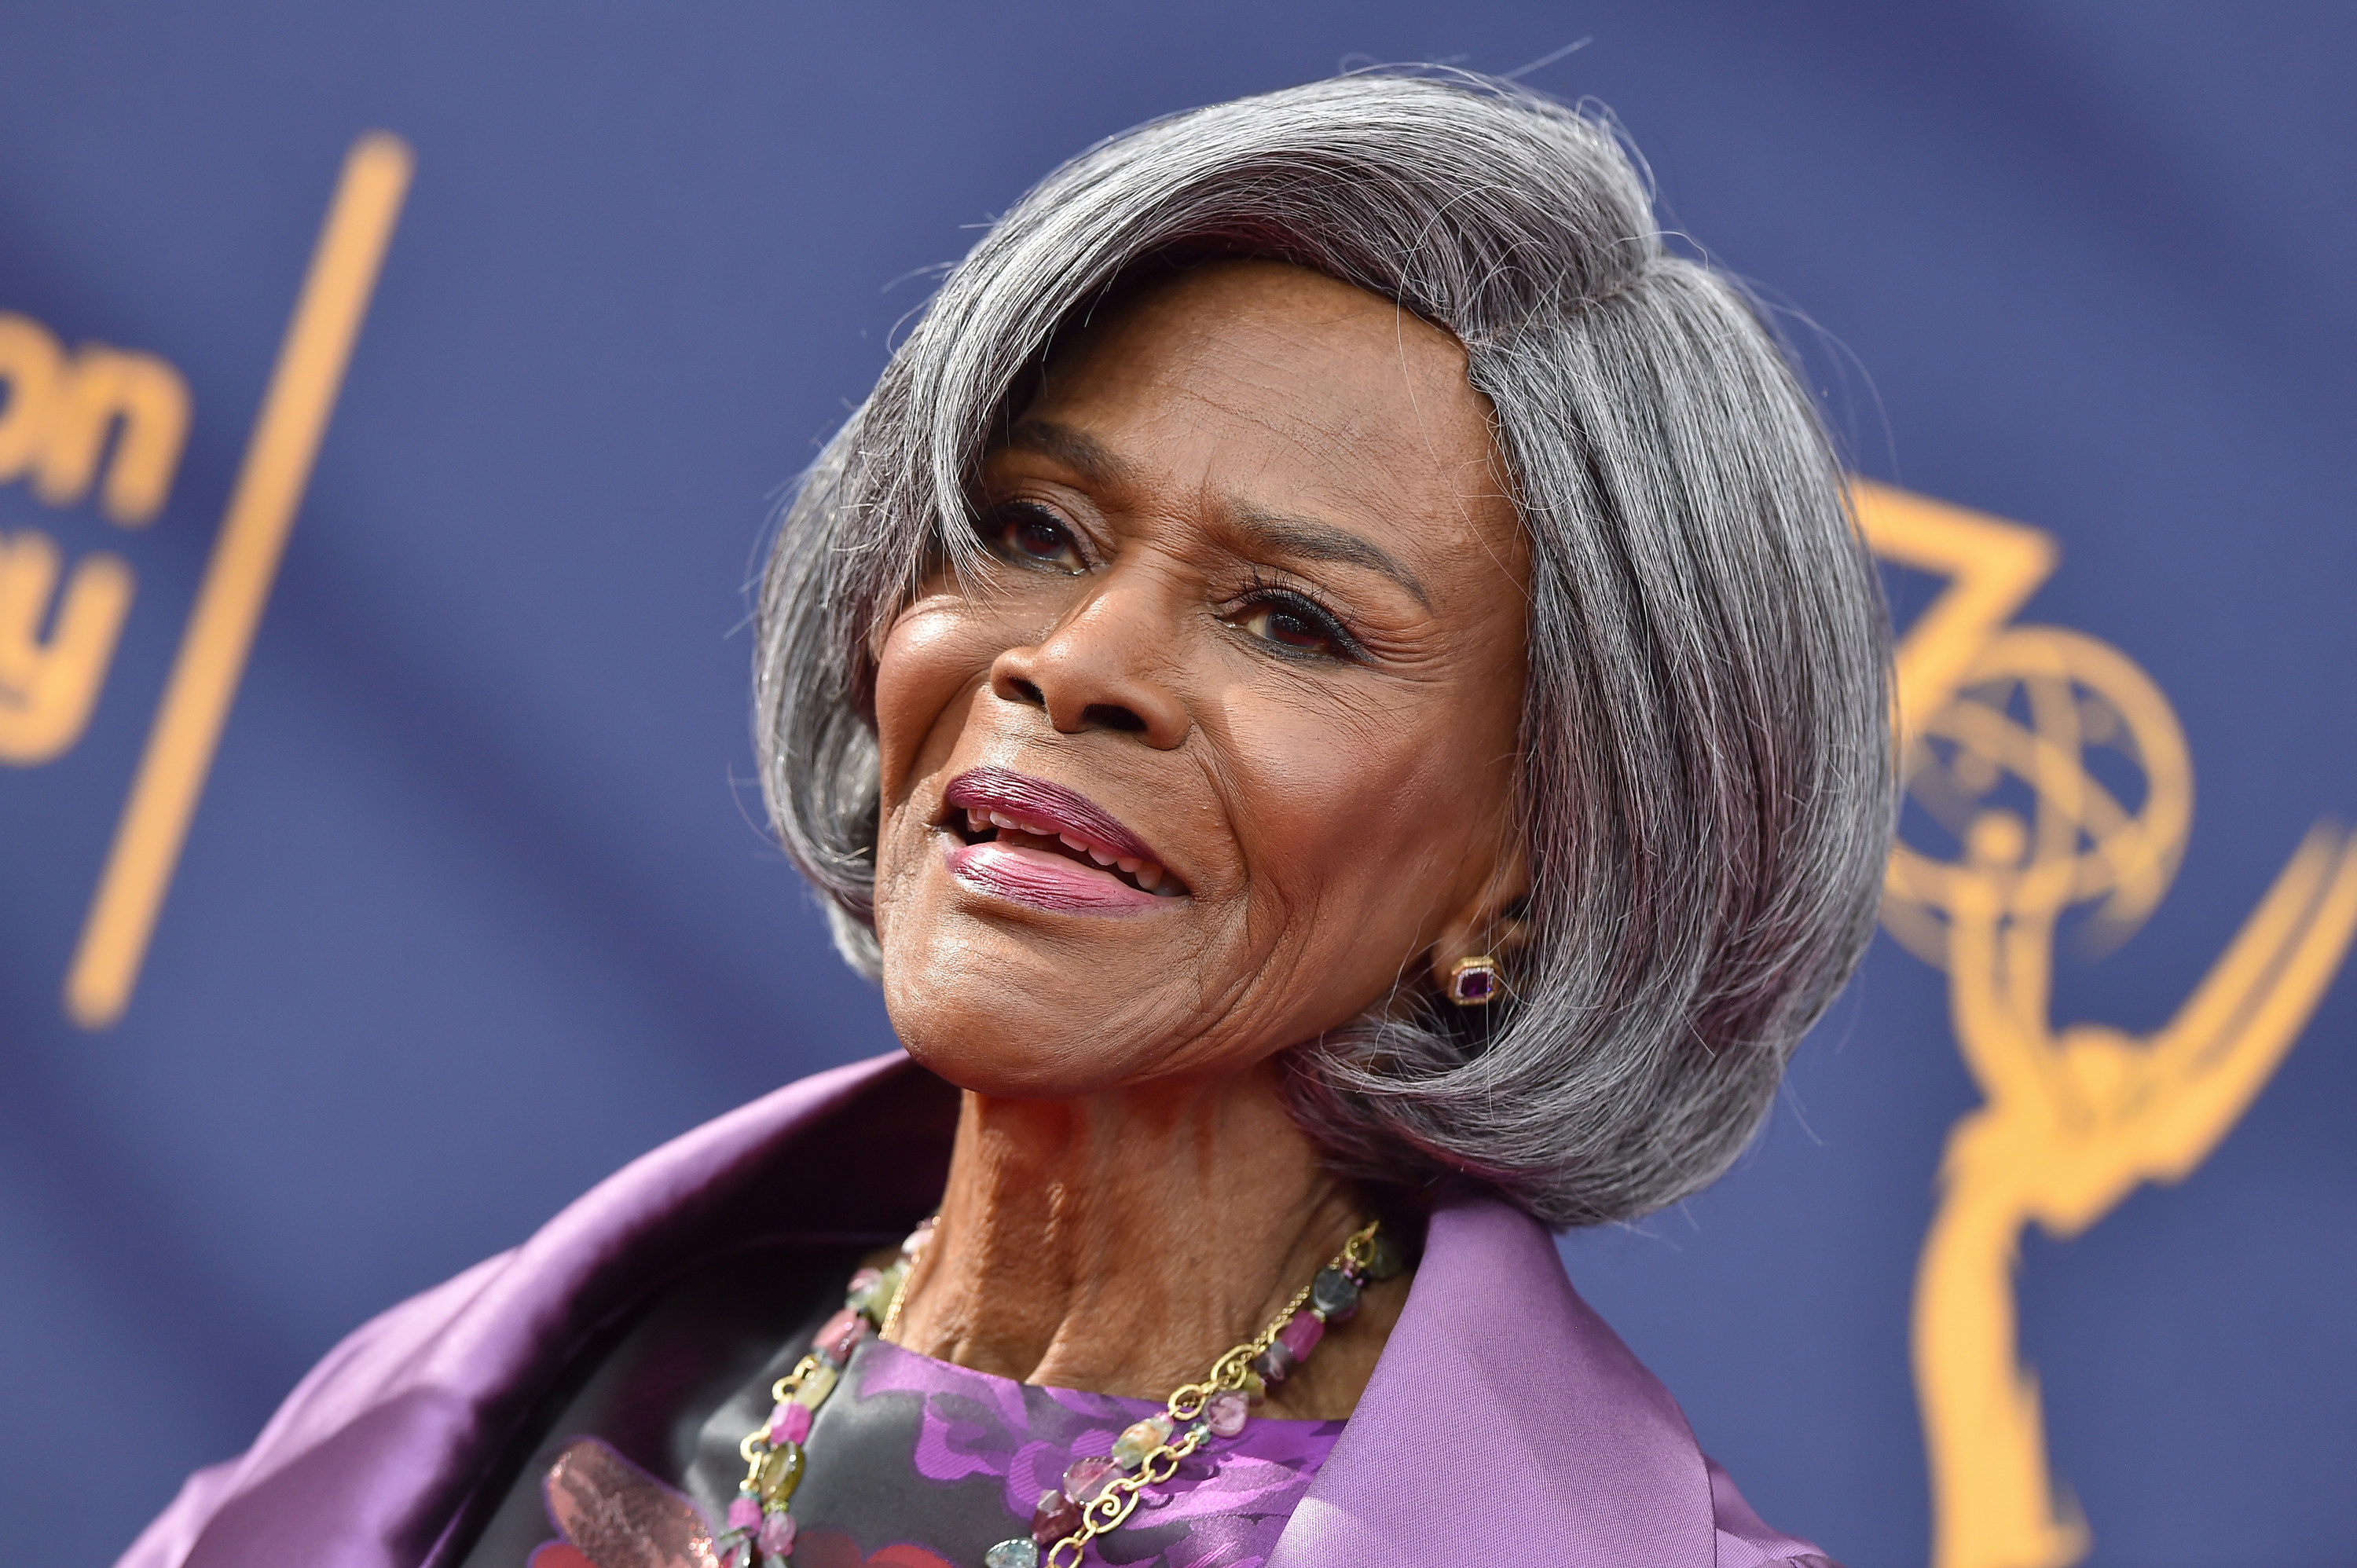 Cicely Tyson wears a silk blazer and a necklace while posing for the camera.